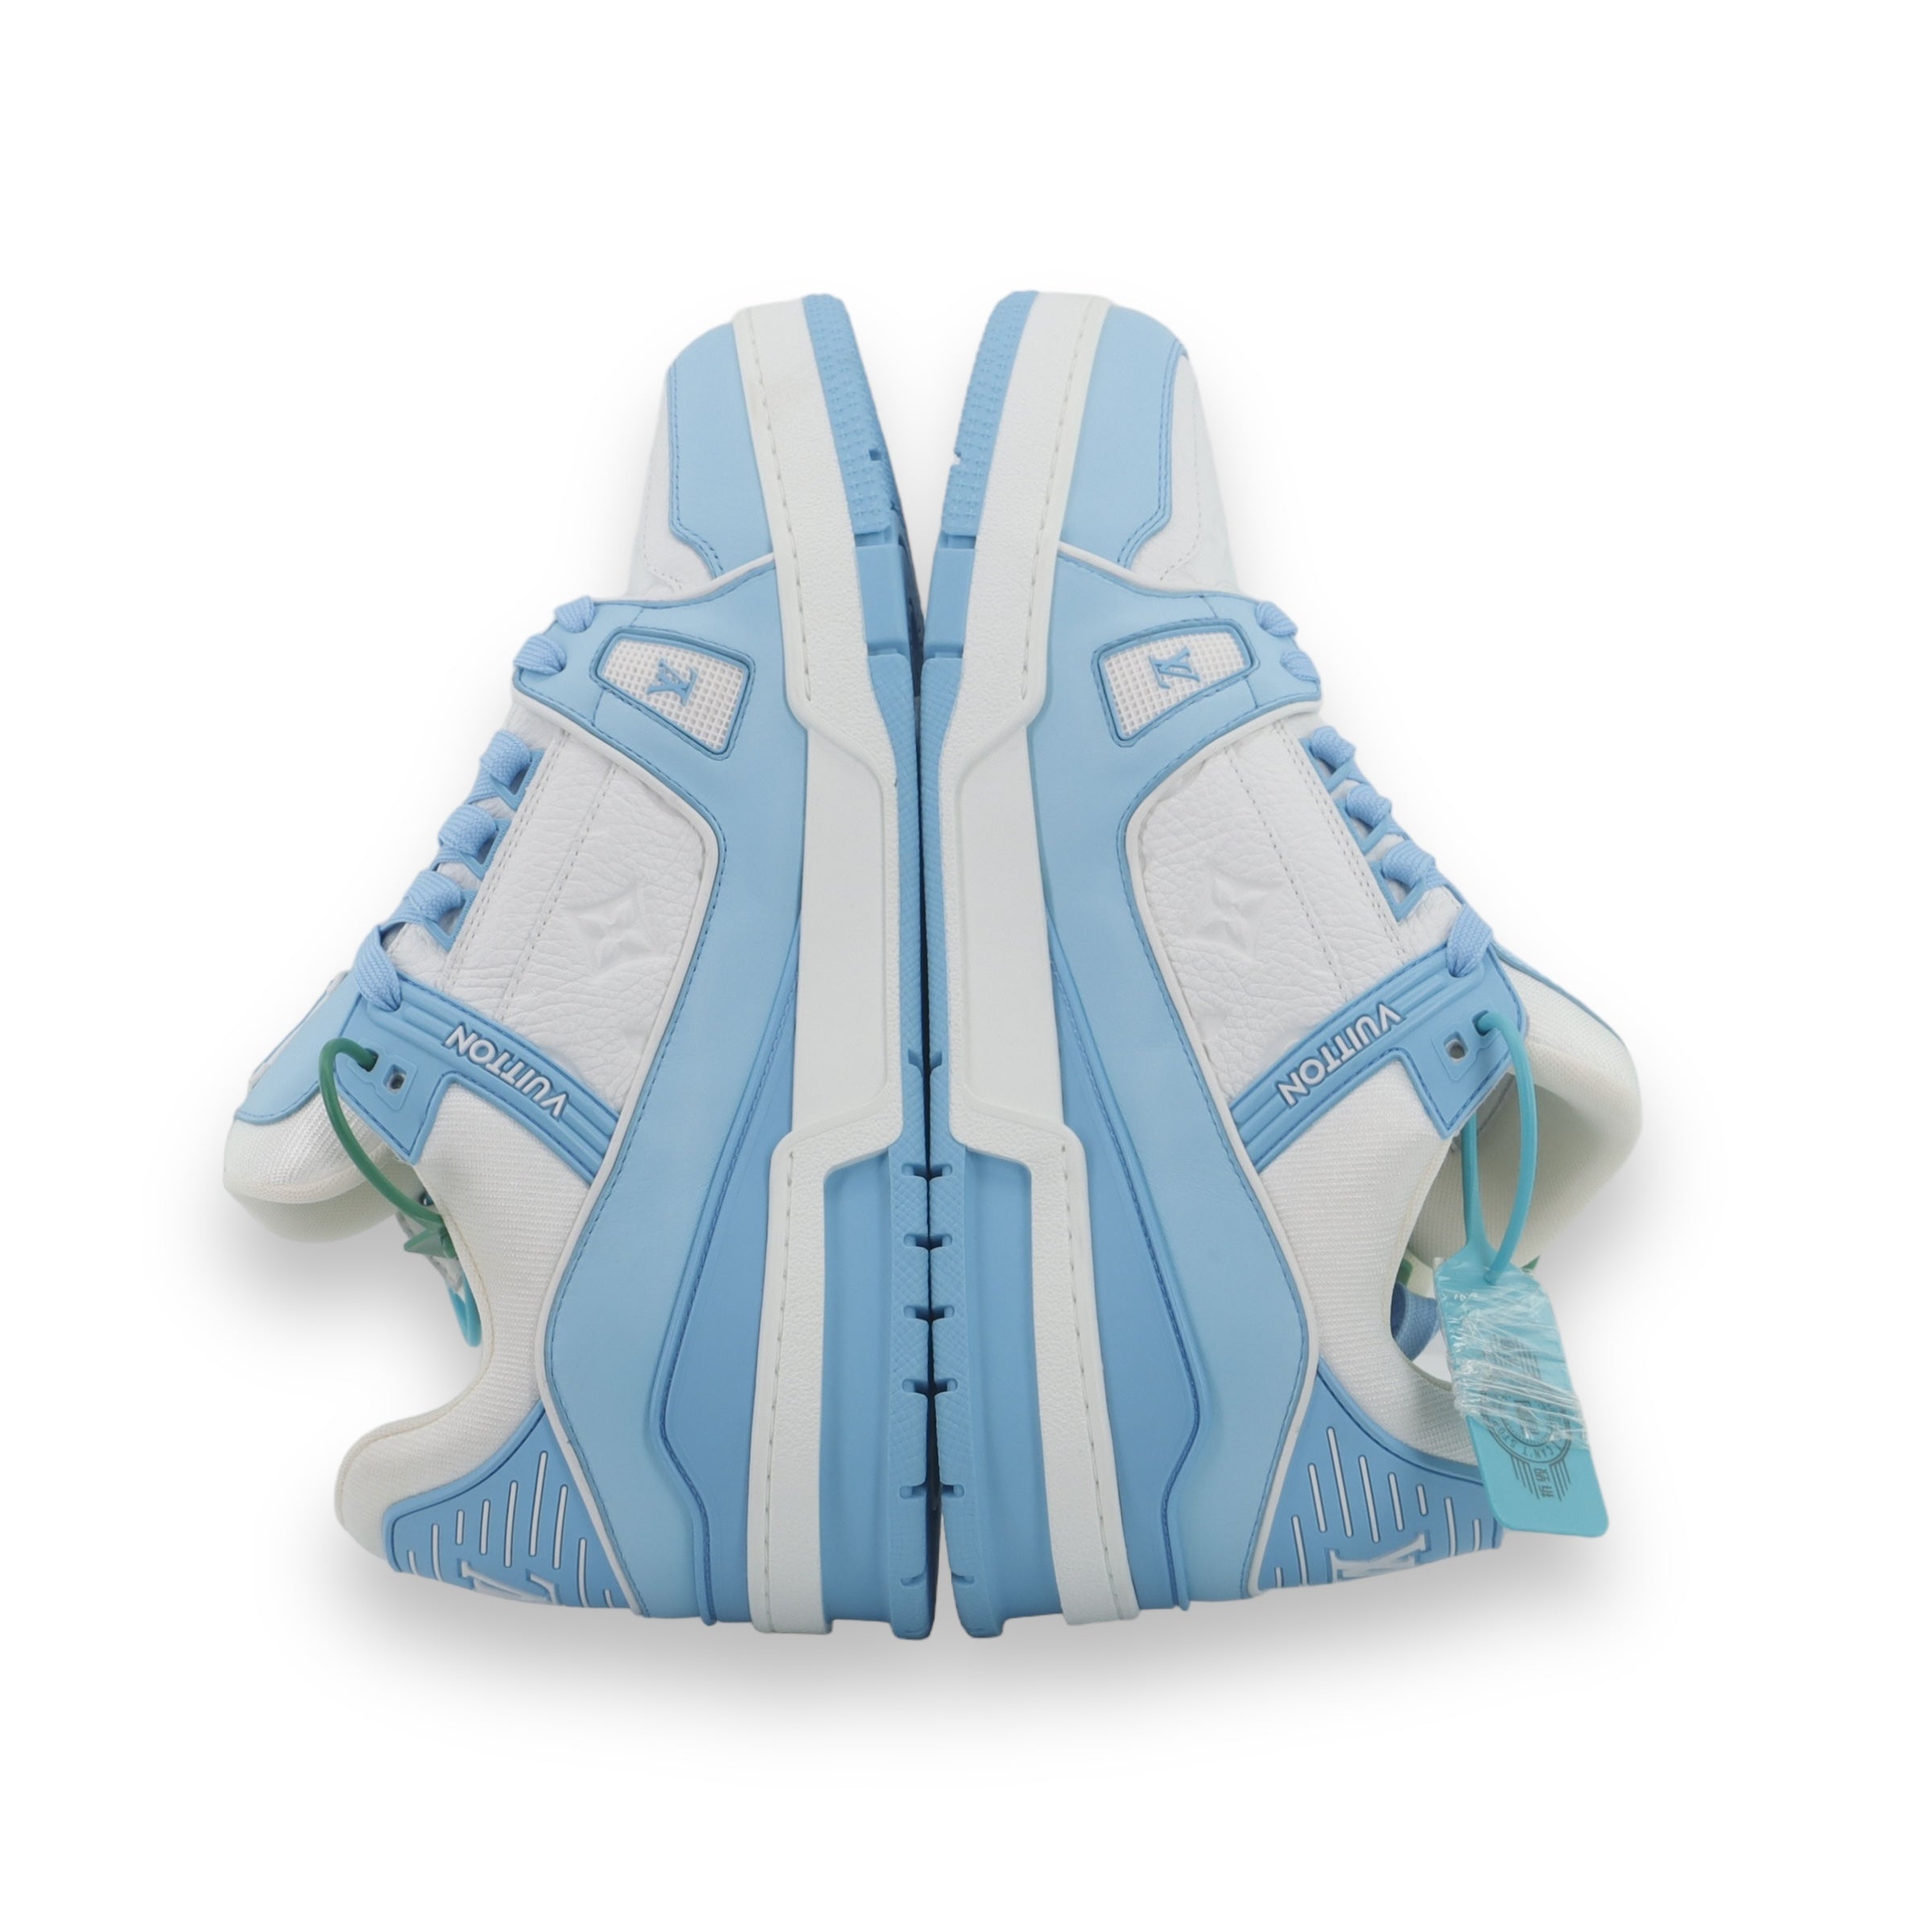 LV White/Baby Blue Trainers